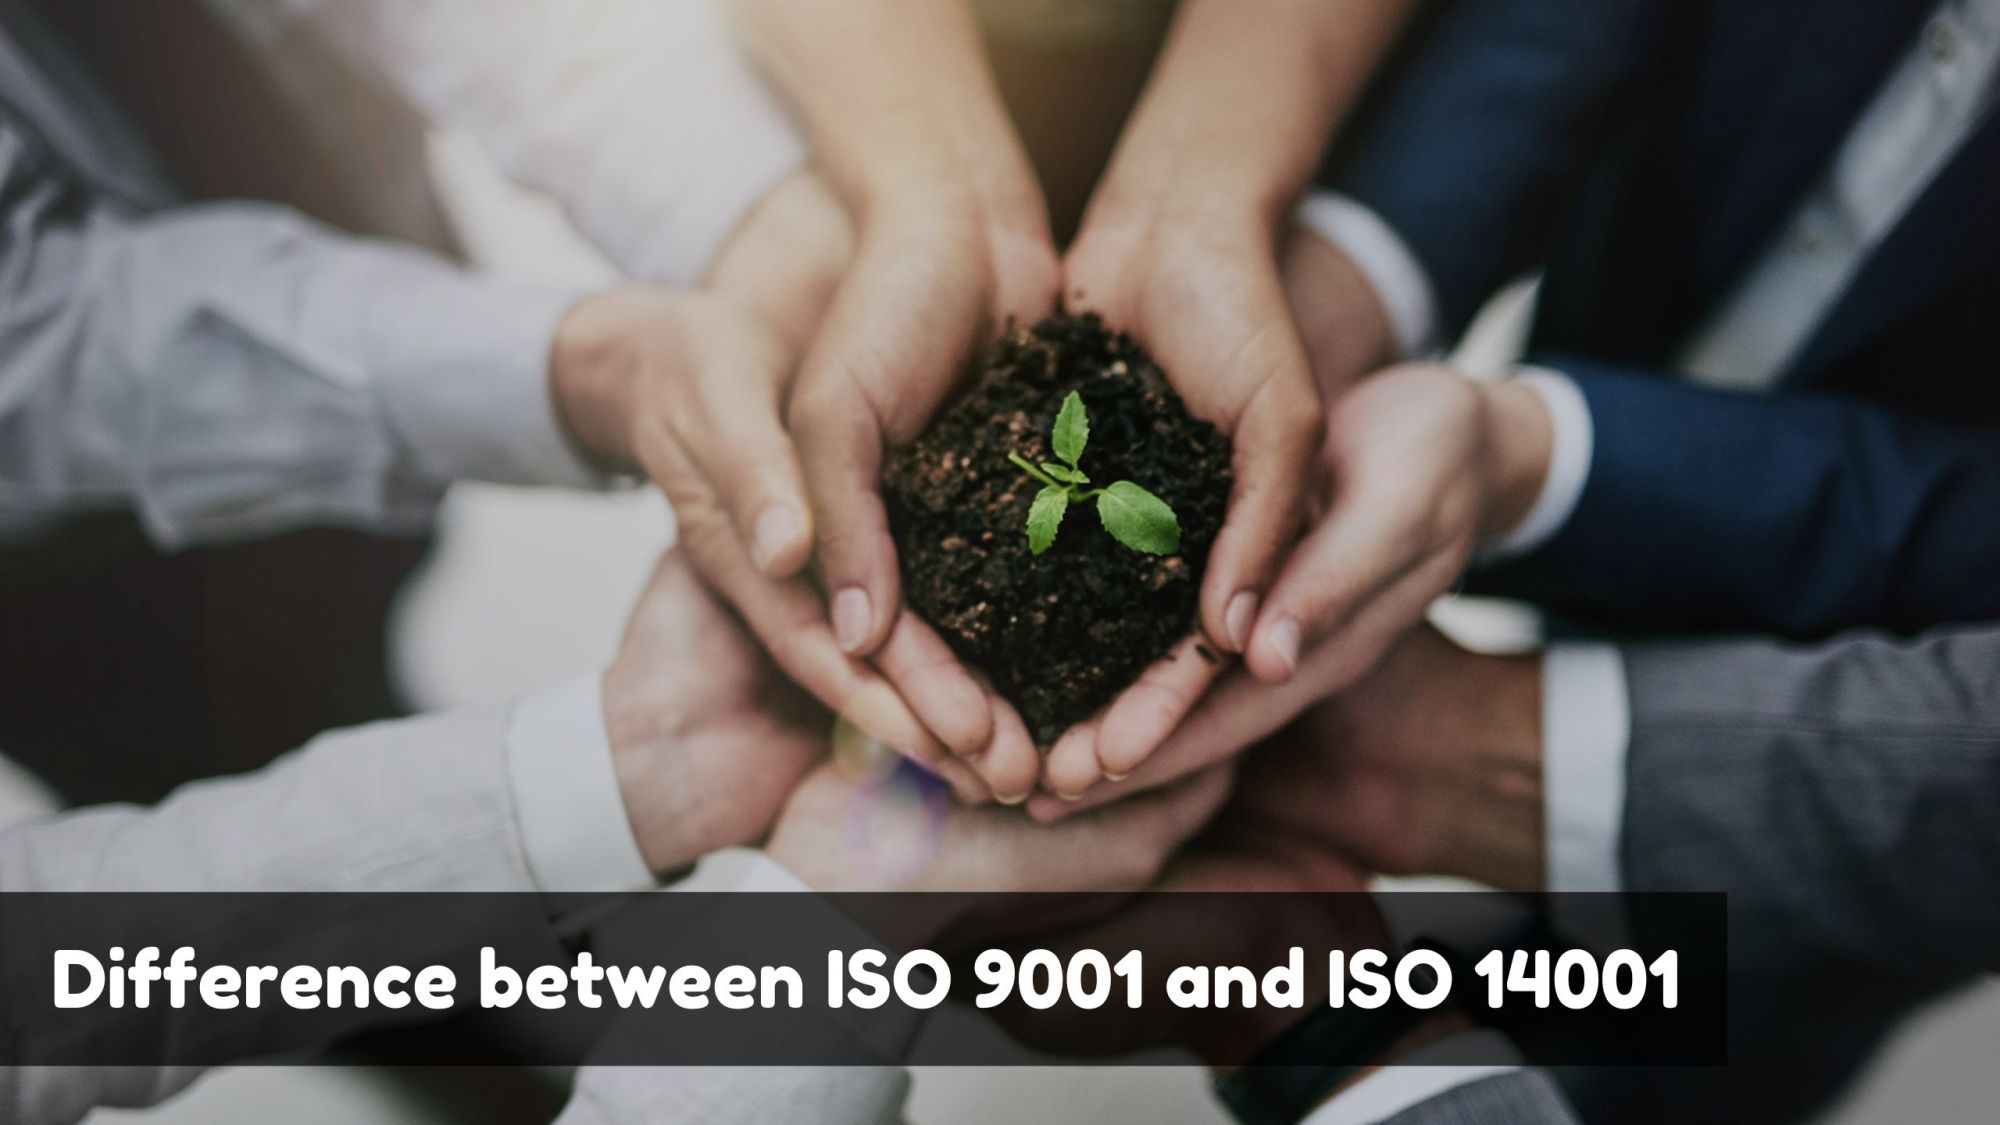 Difference between ISO 9001 and ISO 14001